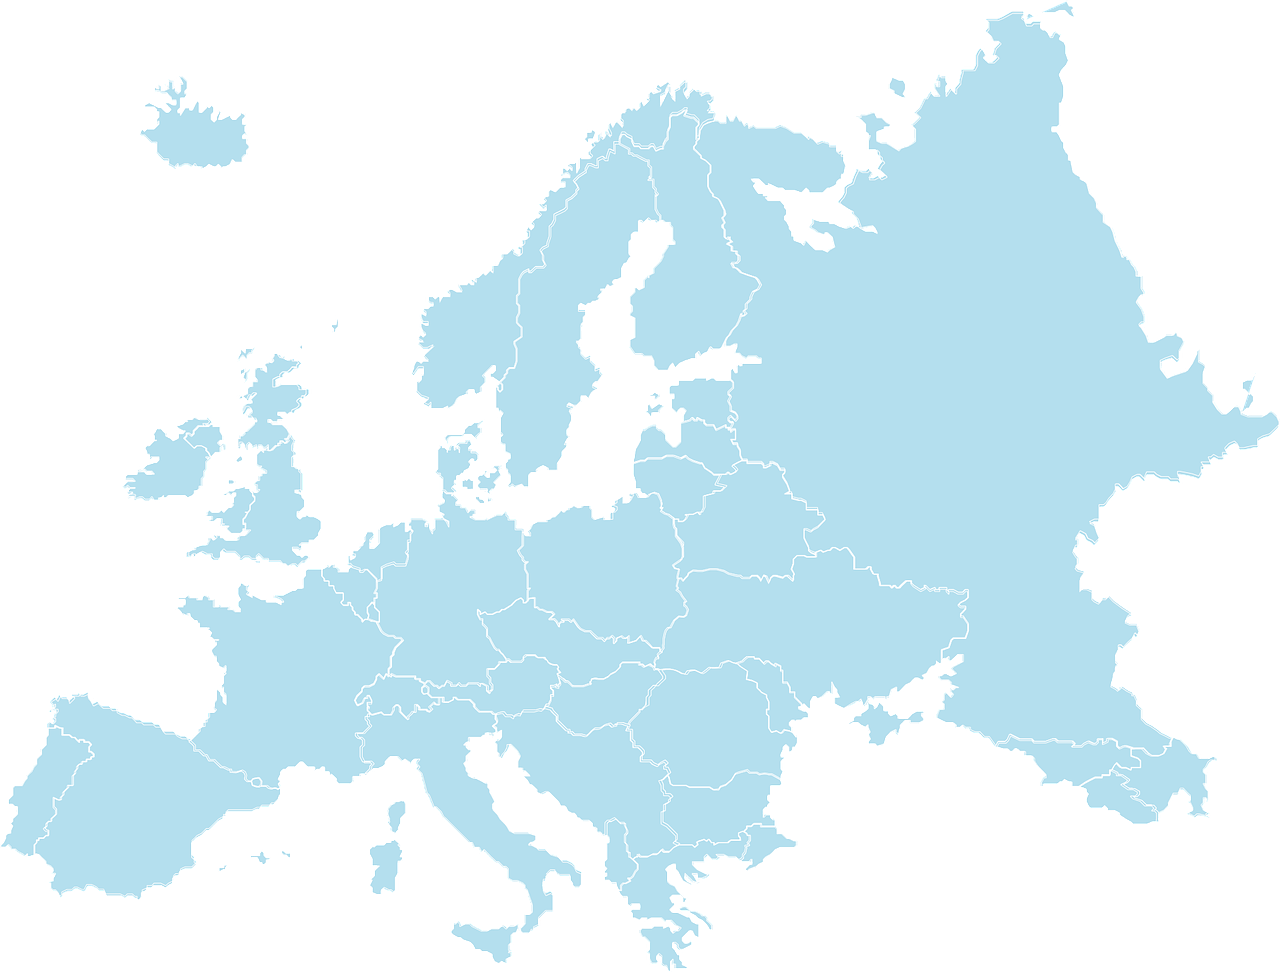 a blue map of europe on a black background, shutterstock, regionalism, outline, sky blue, no outline, 2 0 5 6 x 2 0 5 6